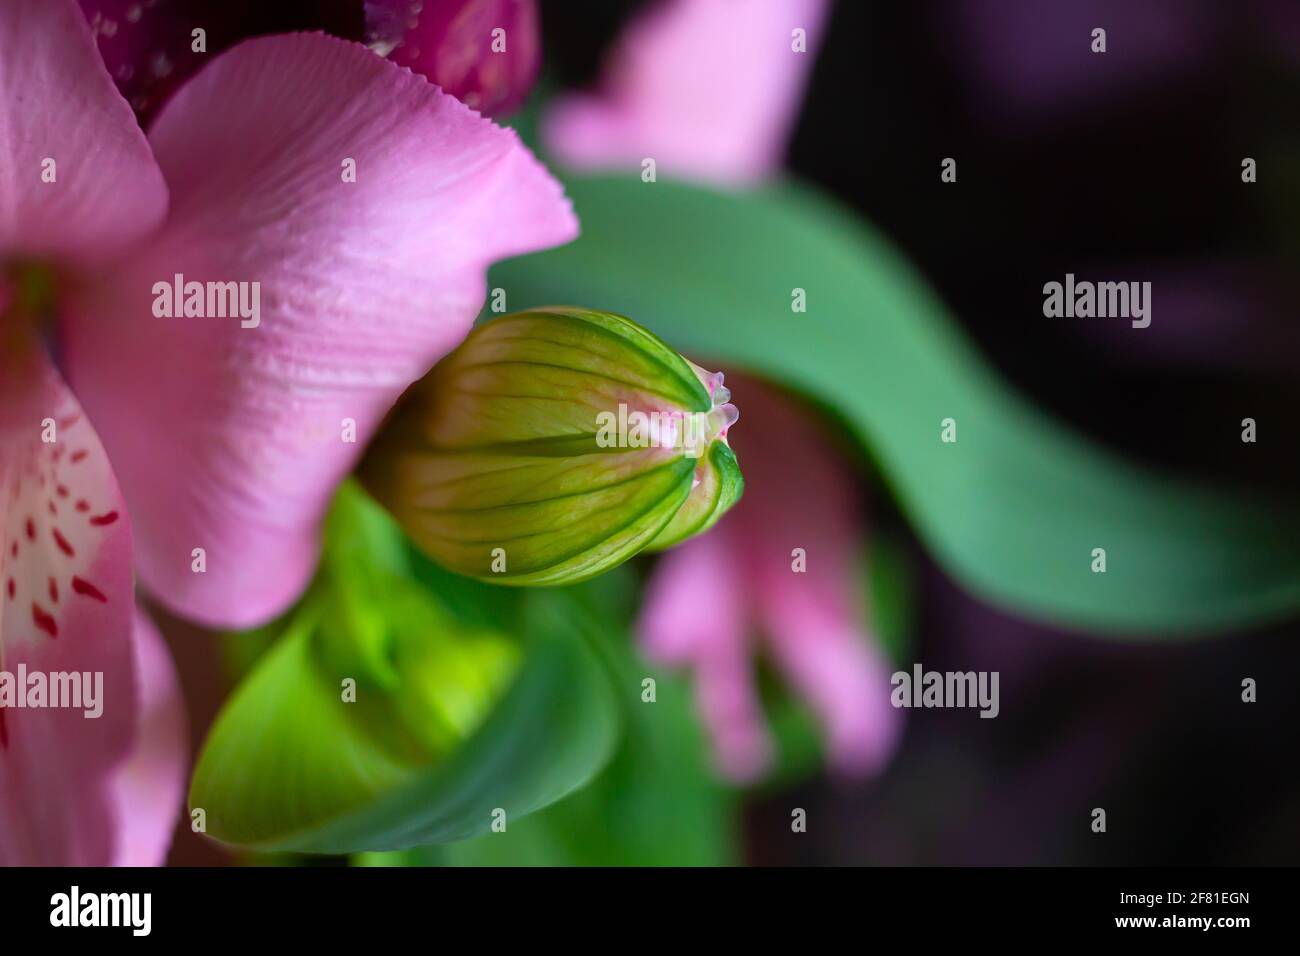 Close up macro fresh green bud of alstroemeria flower with pink petals, beauty in nature Stock Photo